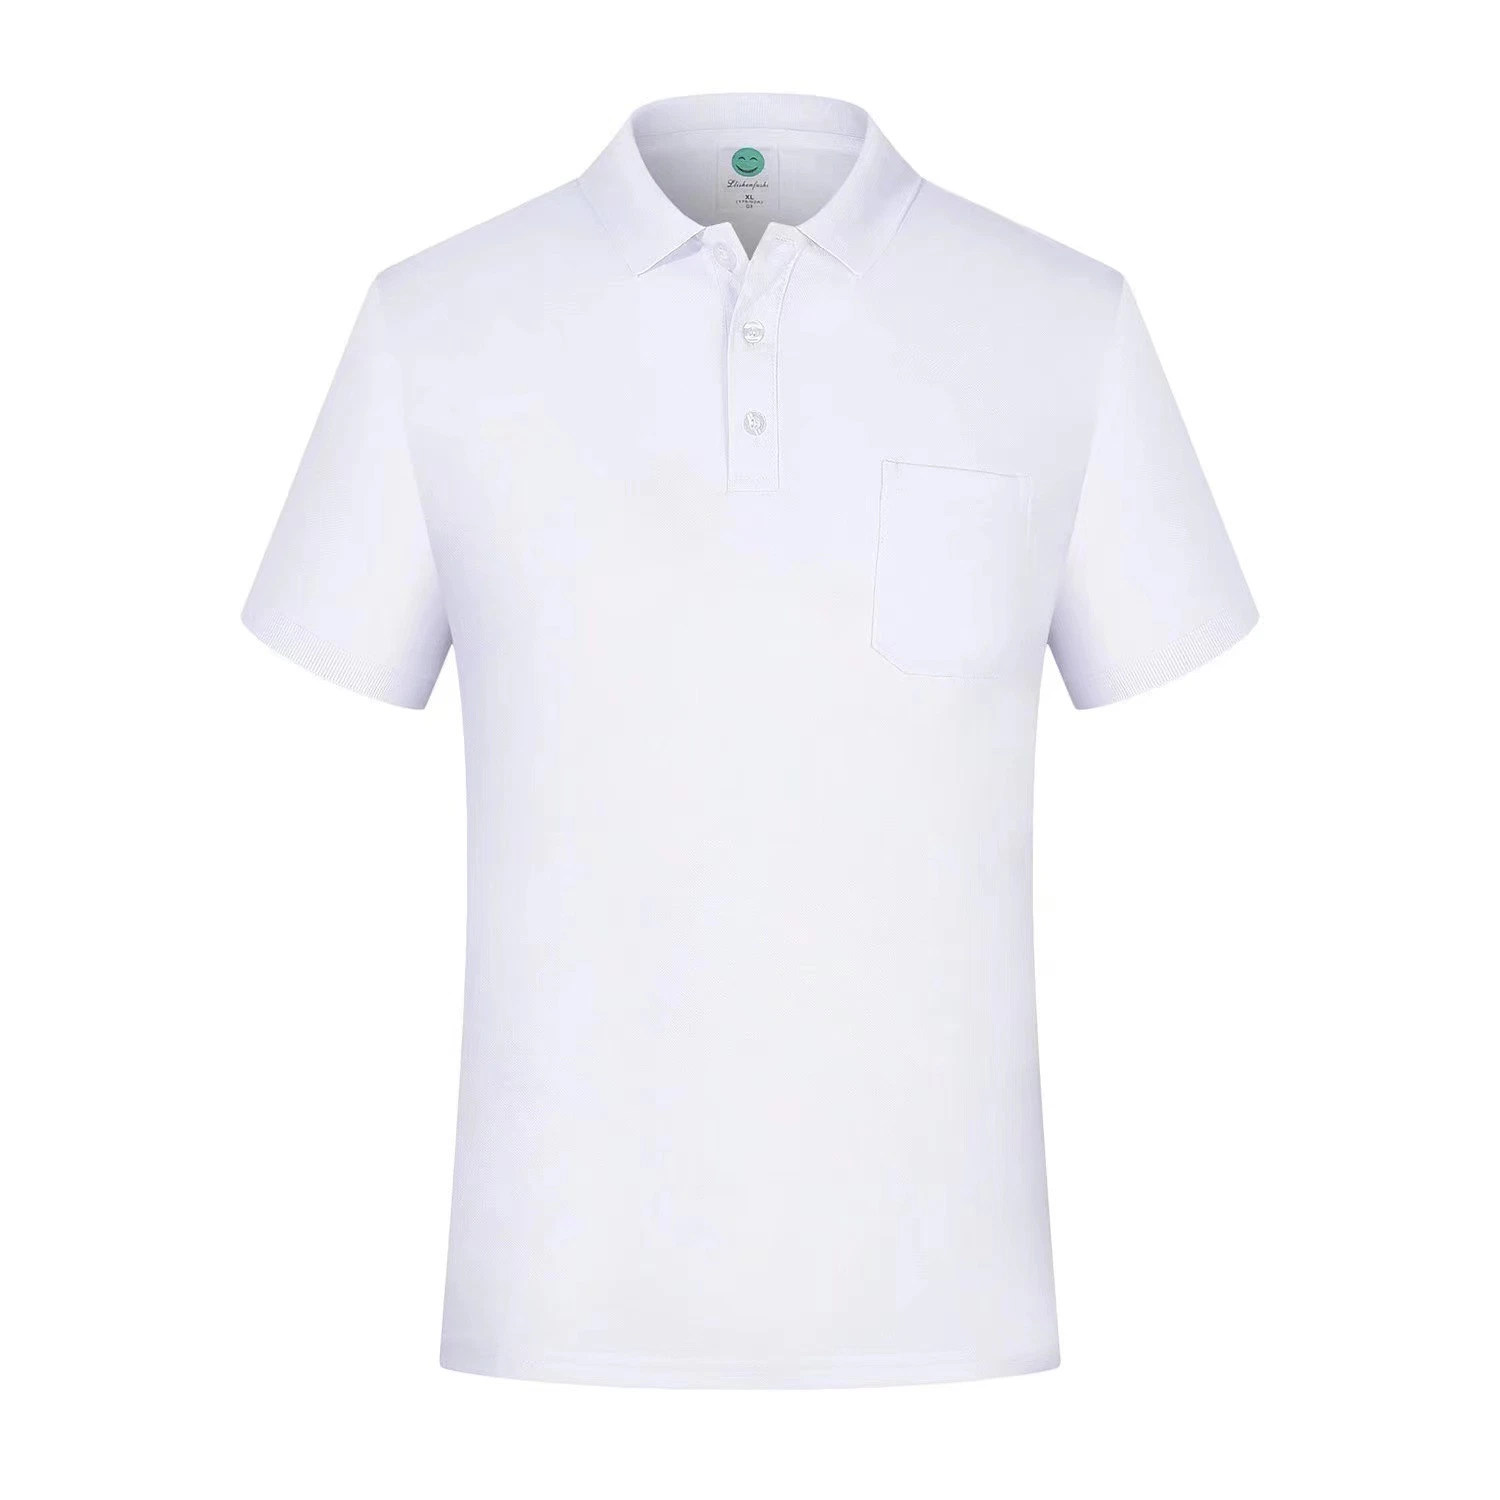 Work Clothes Printing T-Shirt Polo Shirt with Pocket Unisex